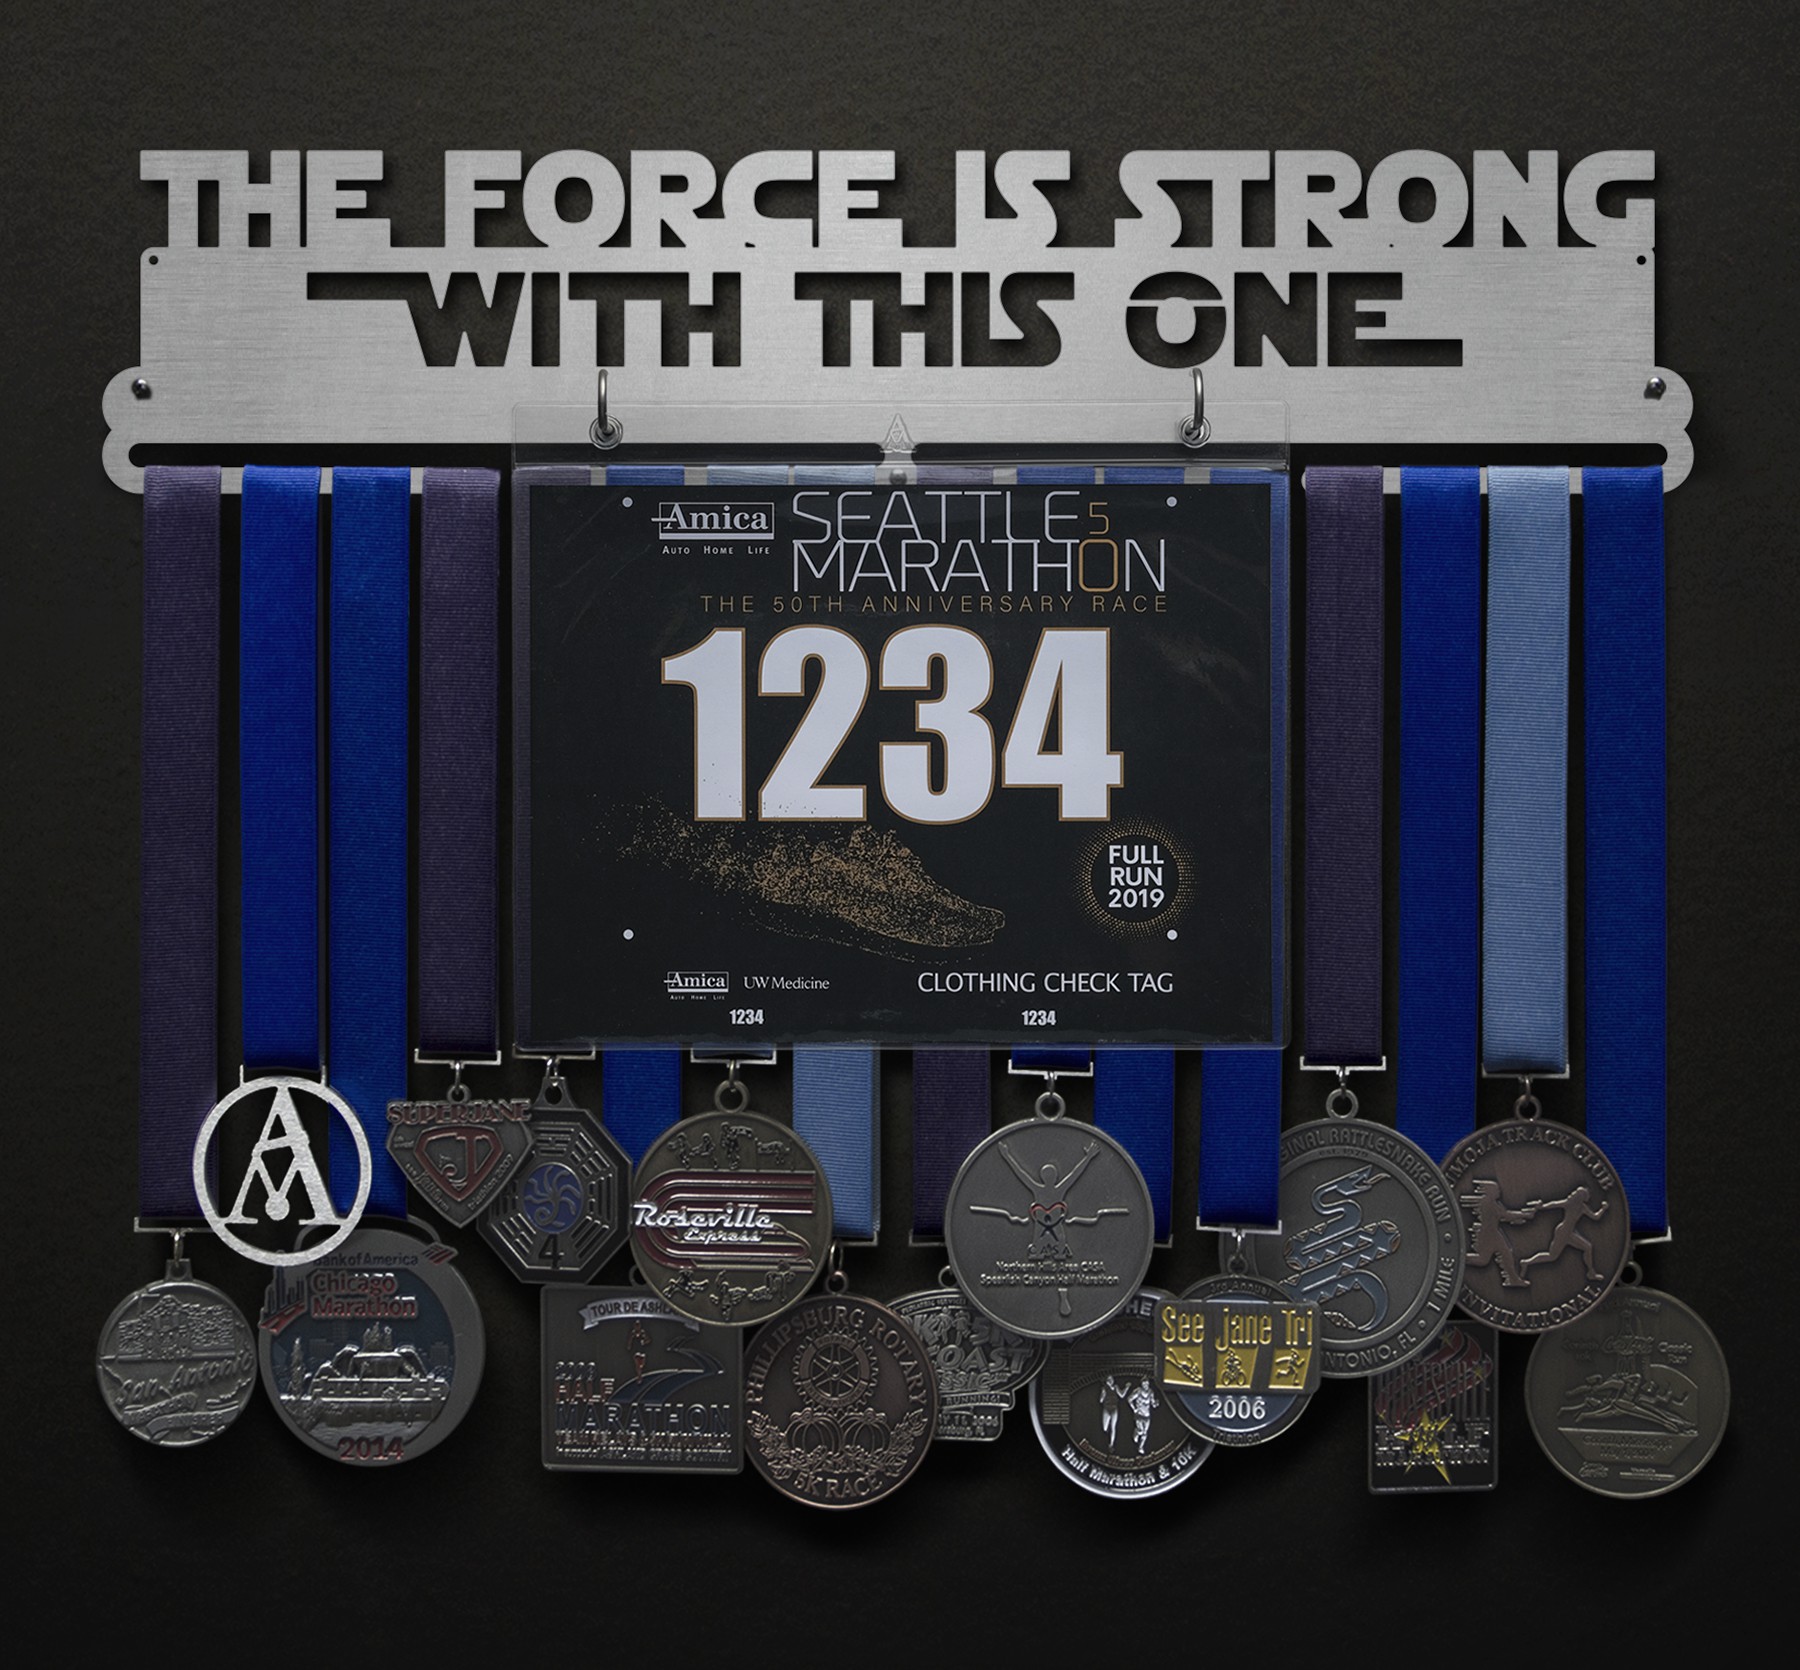 The Force Is Strong With This One Bib and Medal Display